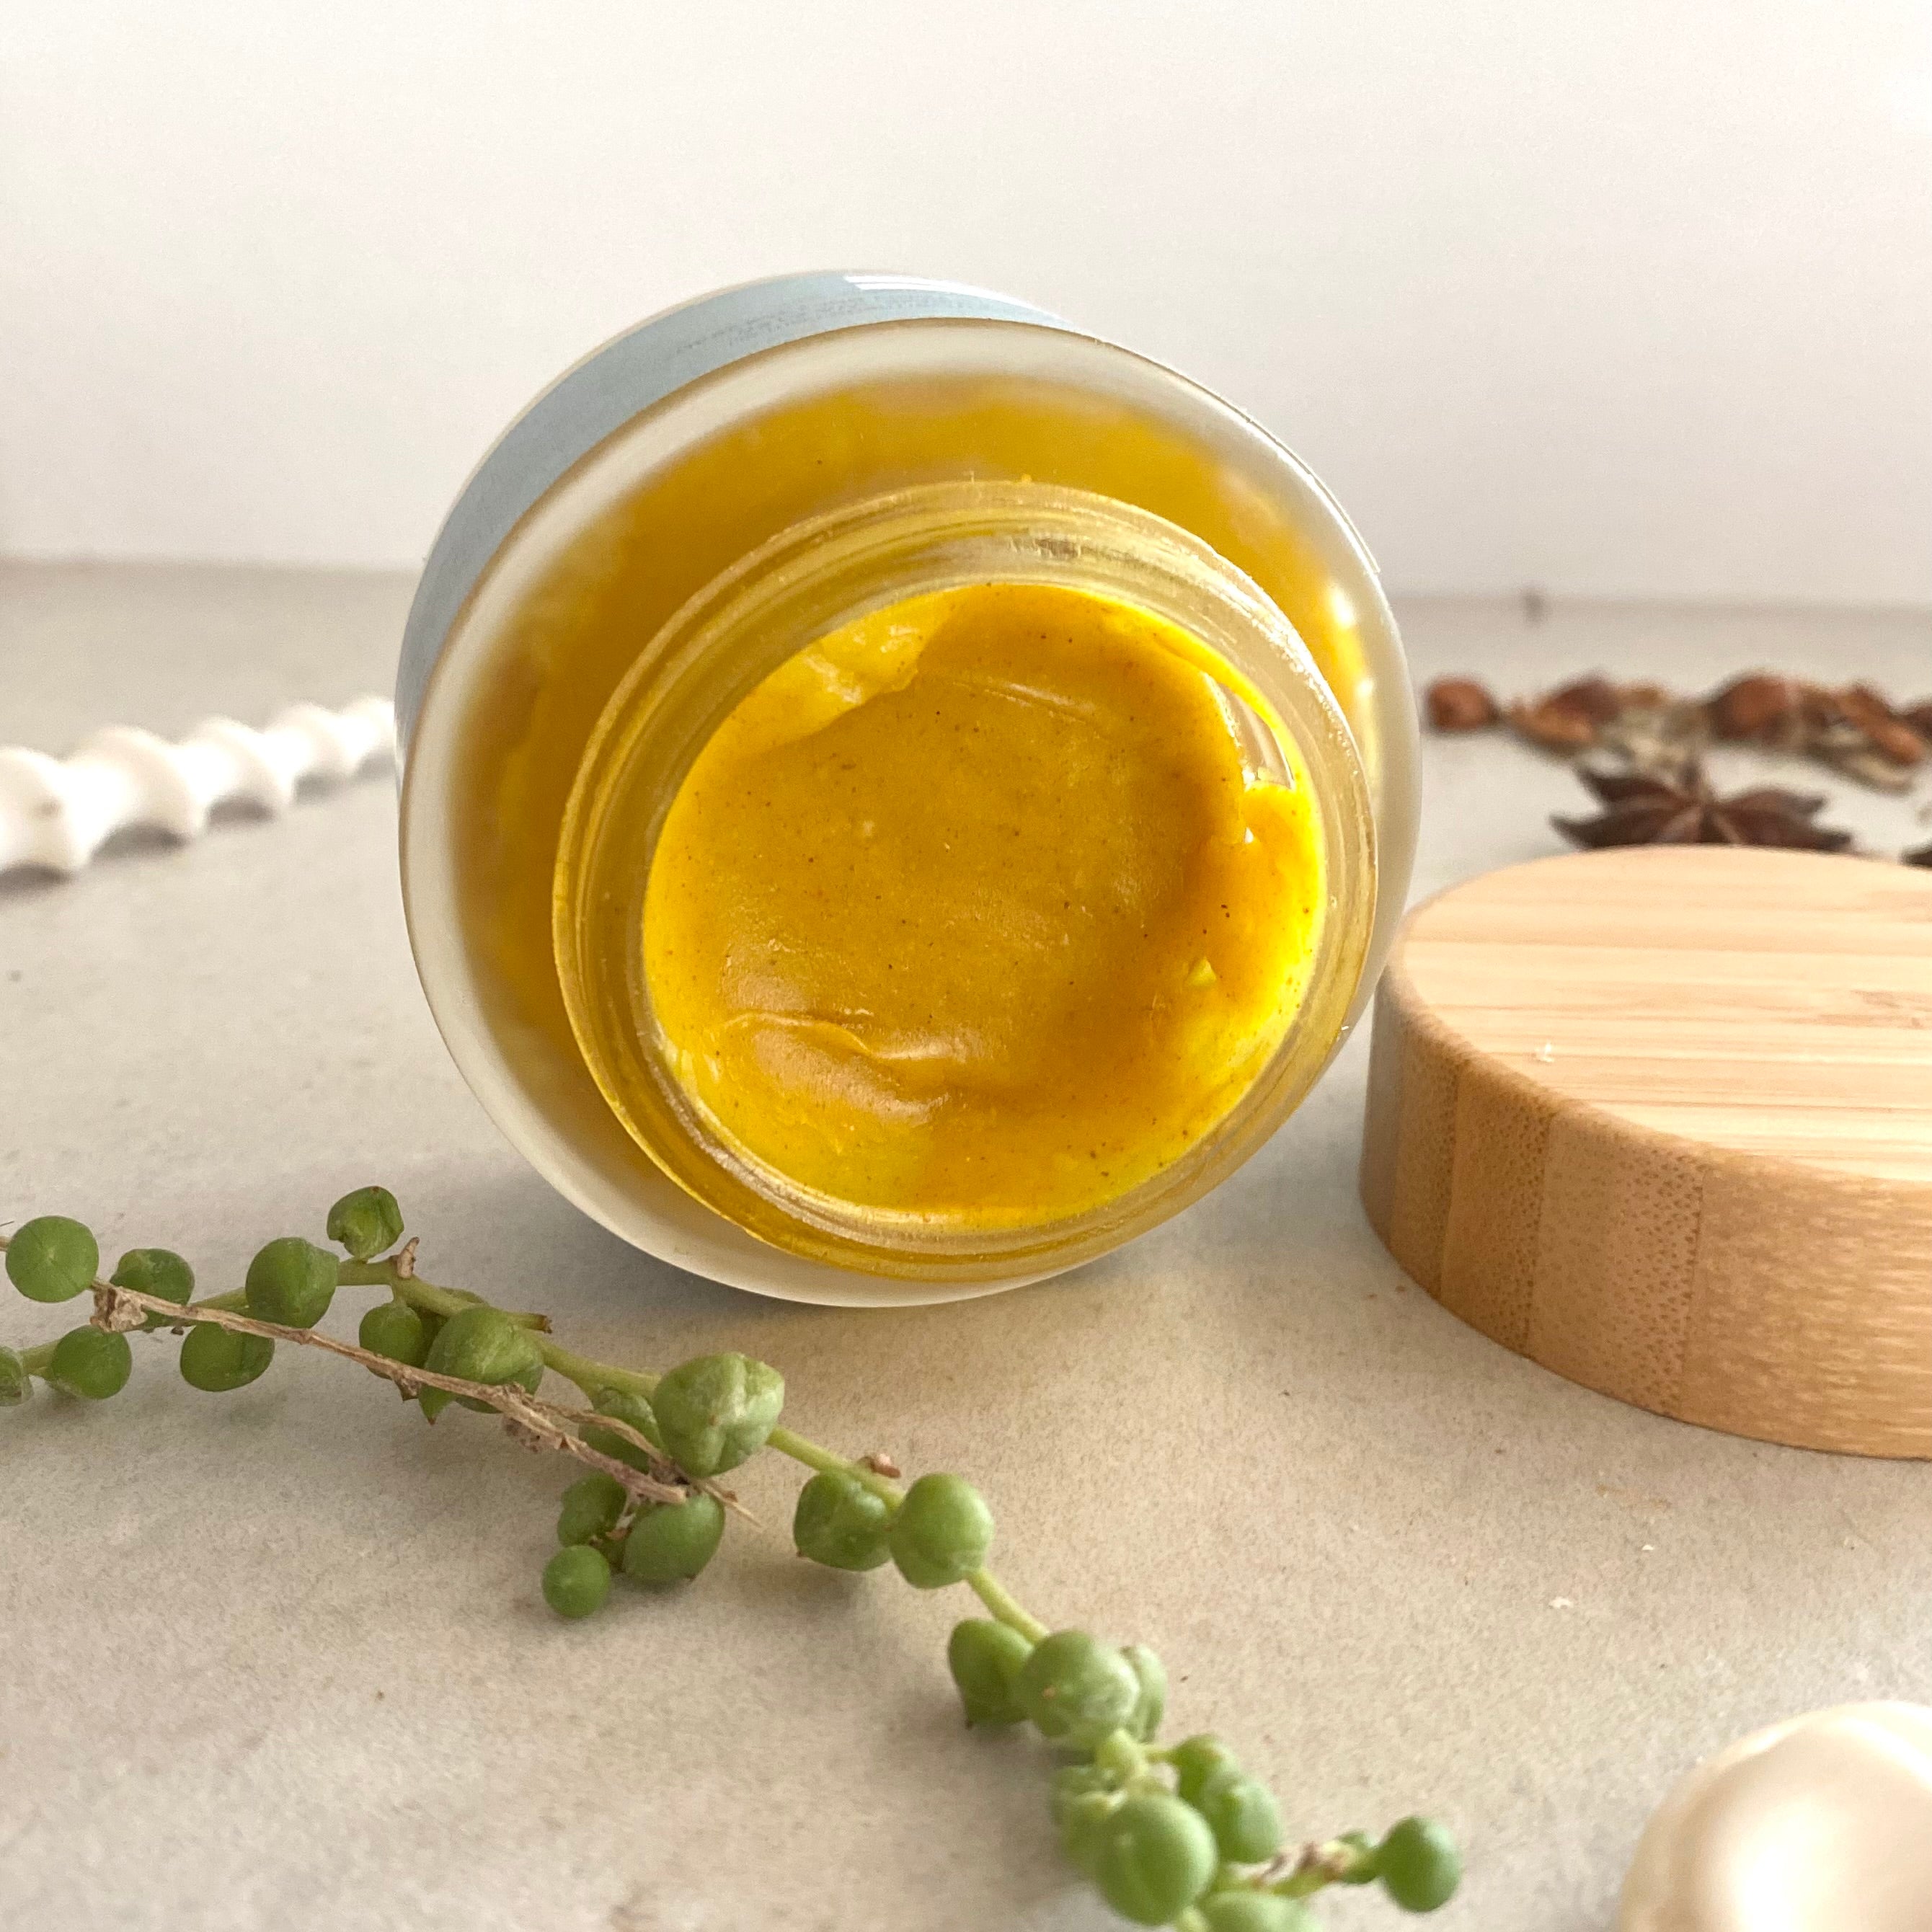 Face Cleansing Balm